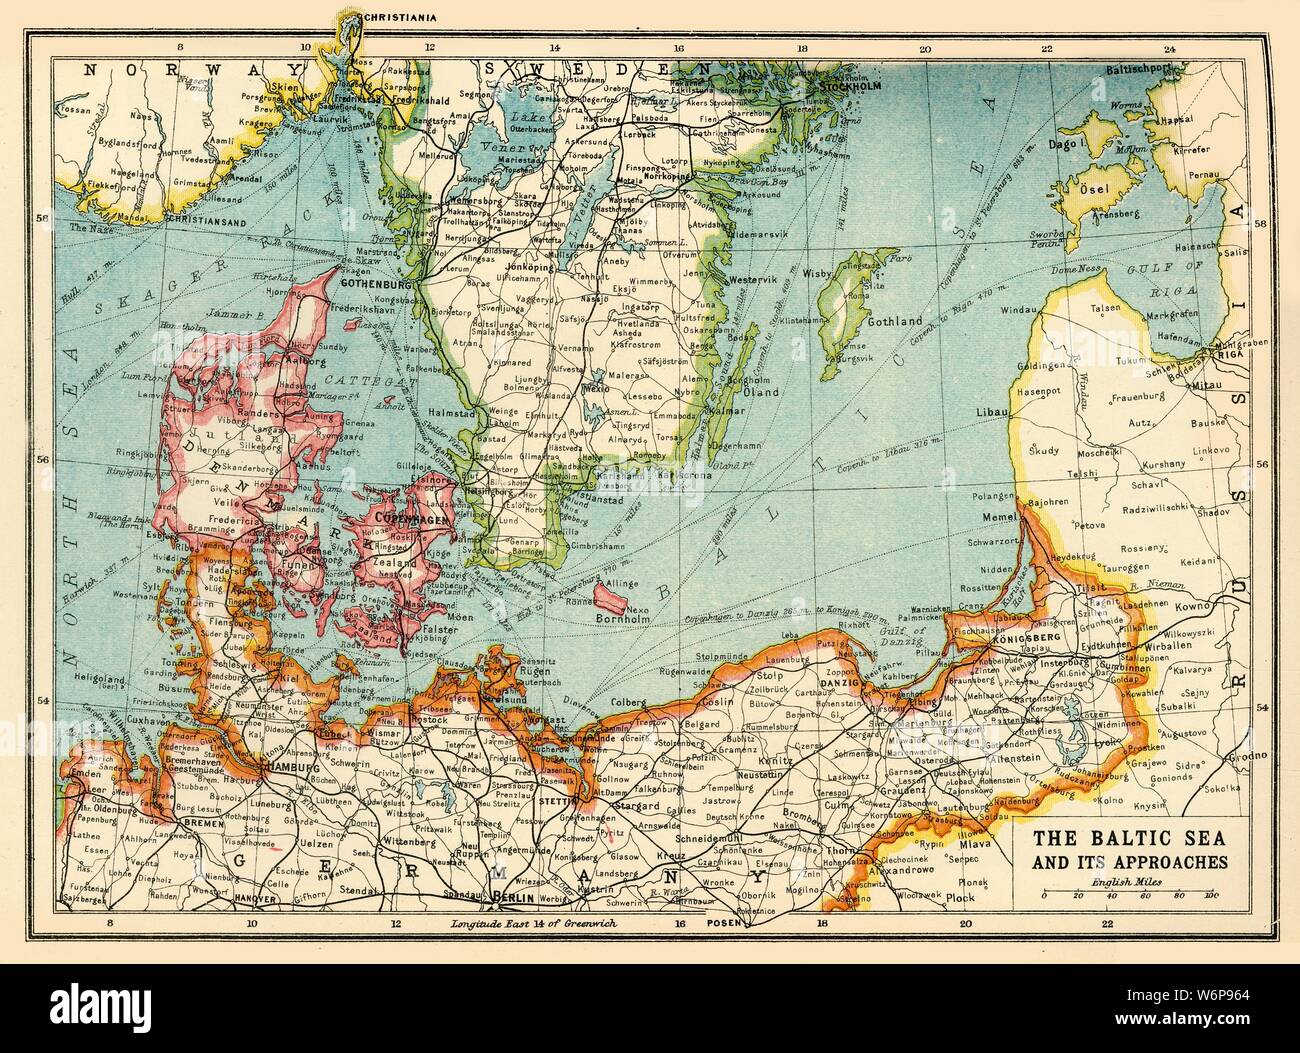 'The Baltic Sea and Its Approaches', First World War, c1915, (c1920). Map of part of northern Europe, showing sections of the coasts of Norway, Sweden, Russia, Germany and Denmark. From &quot;The Great World War - A History&quot; Volume IV, edited by Frank A Mumby. [The Gresham Publishing Company Ltd, London, c1920] Stock Photo